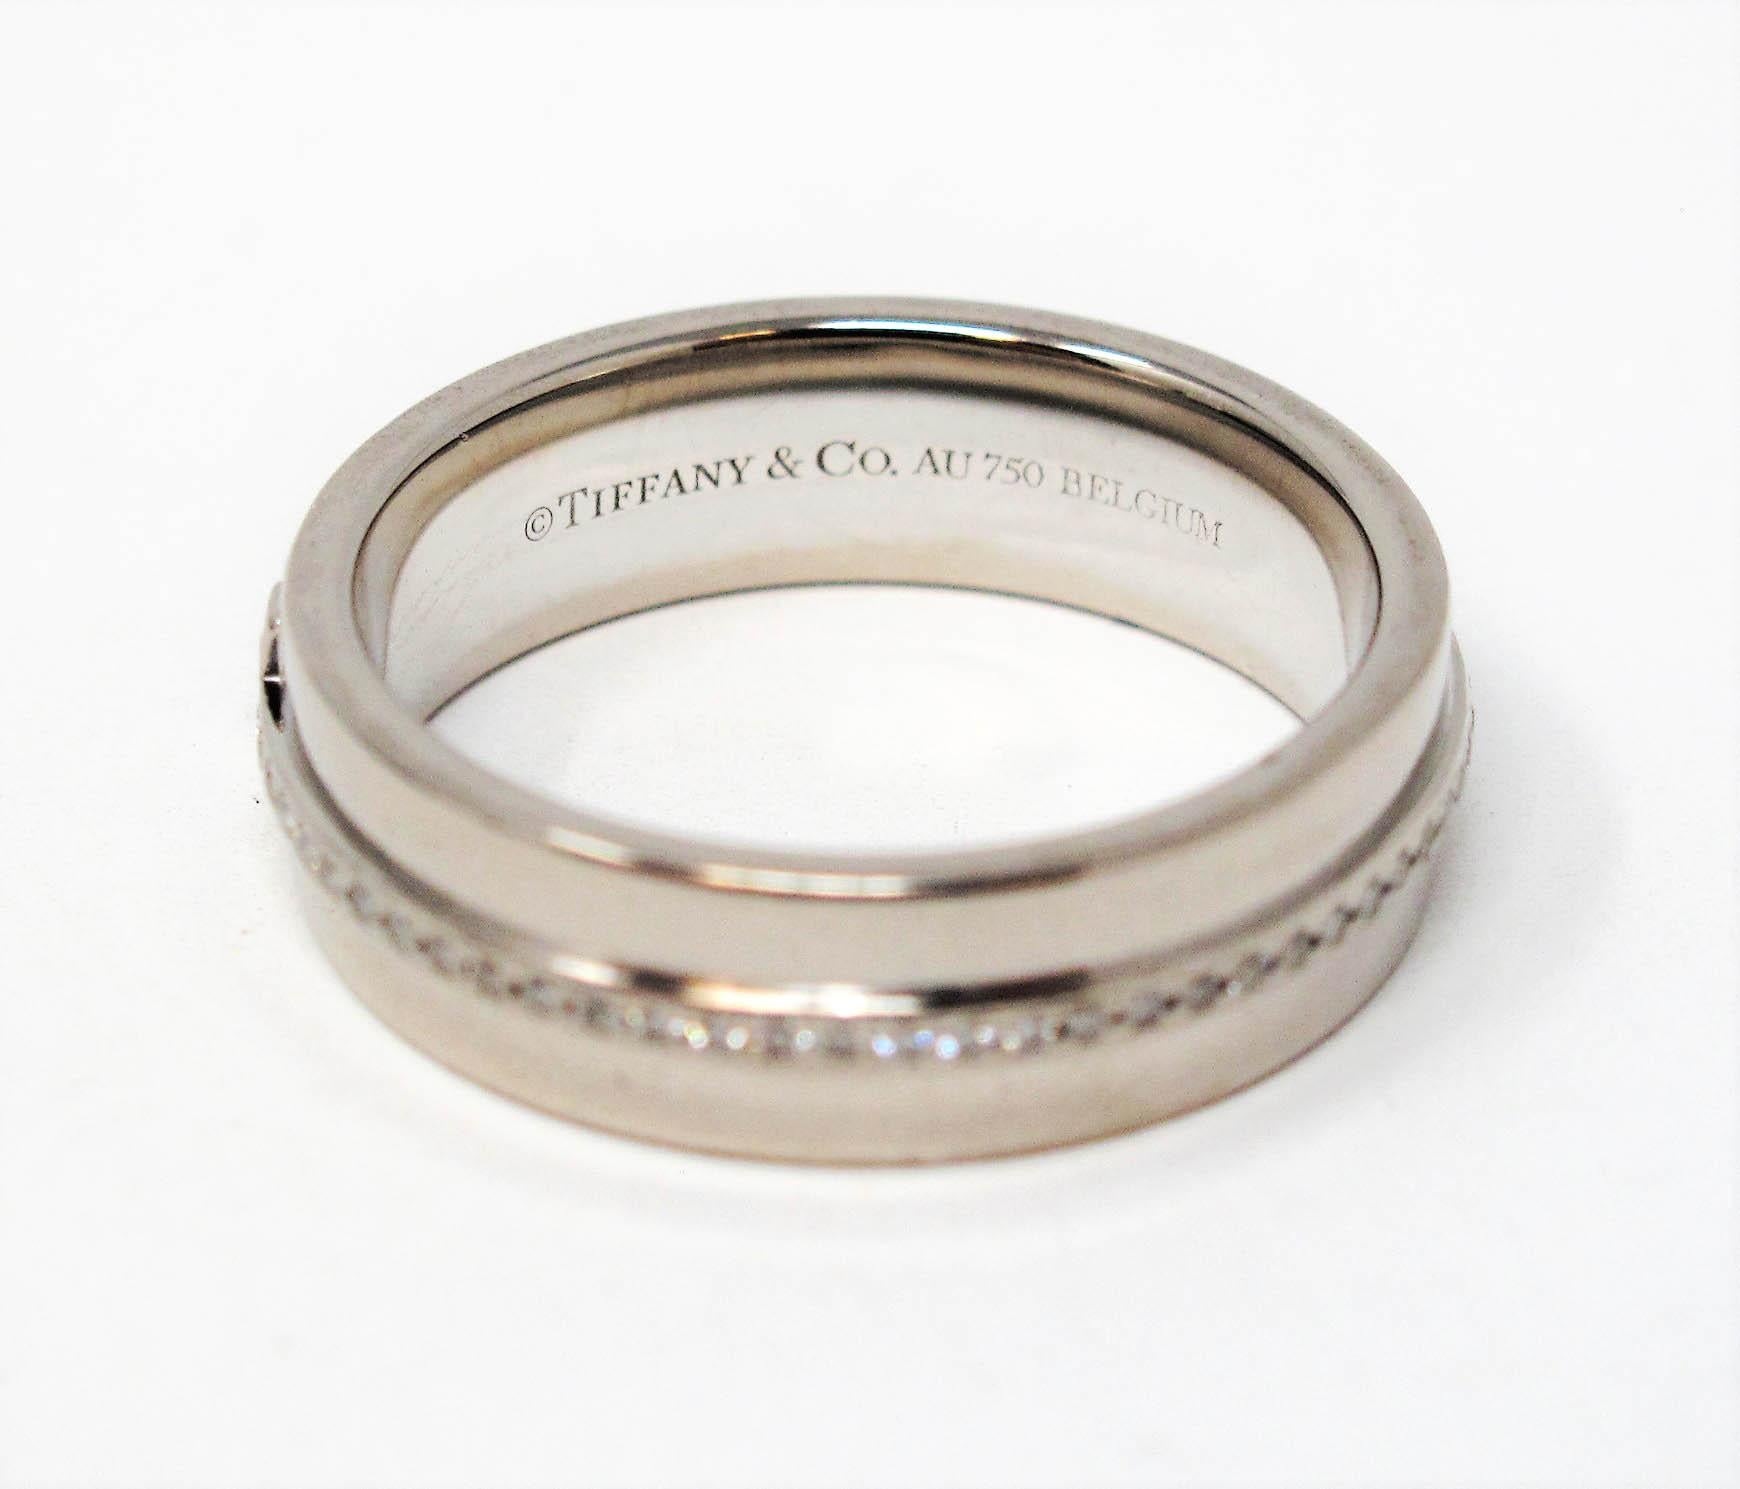 Tiffany & Co. Pave Diamond Tiffany T Band Ring in 18 Karat White Gold In Good Condition For Sale In Scottsdale, AZ